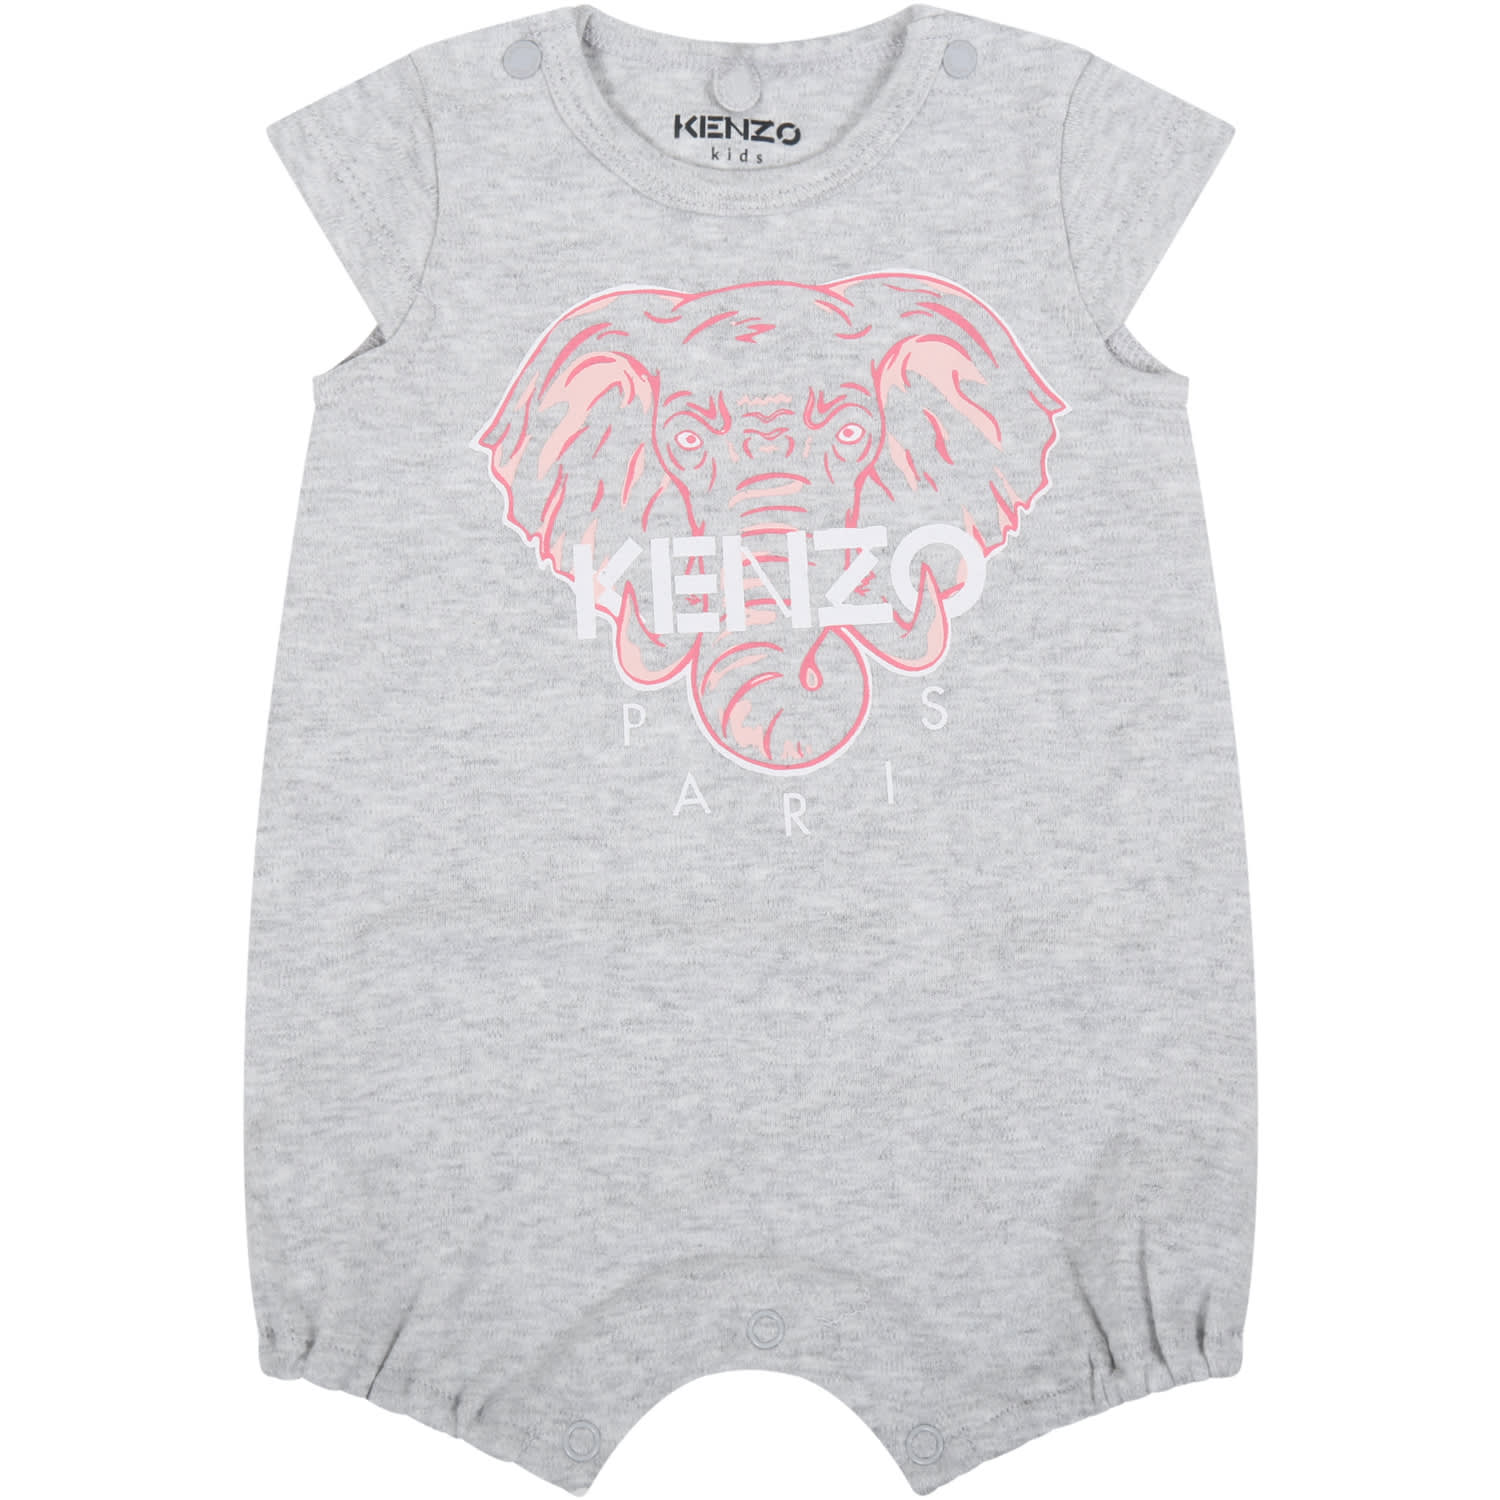 Kenzo Kids Grey Romper For Babygril With Elephant